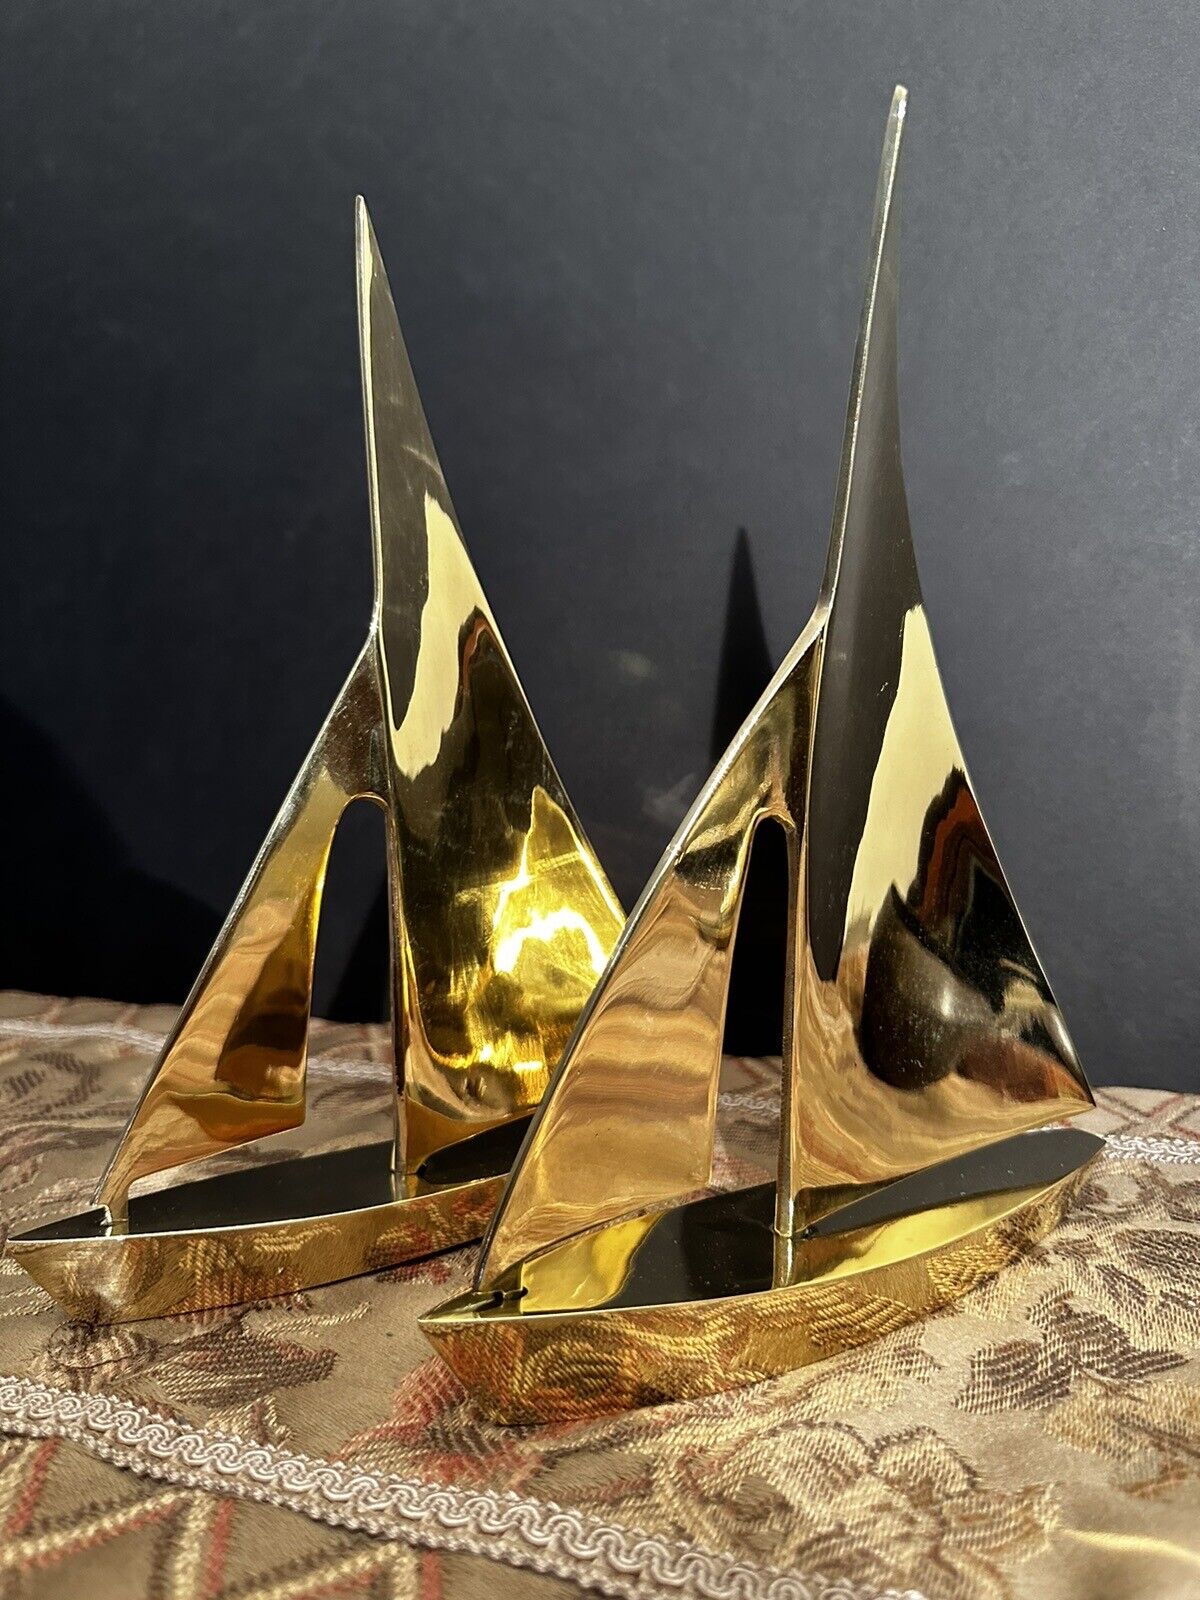 2 Beautiful Mid Century Solid Brass Sailboats In Very Good Condition.